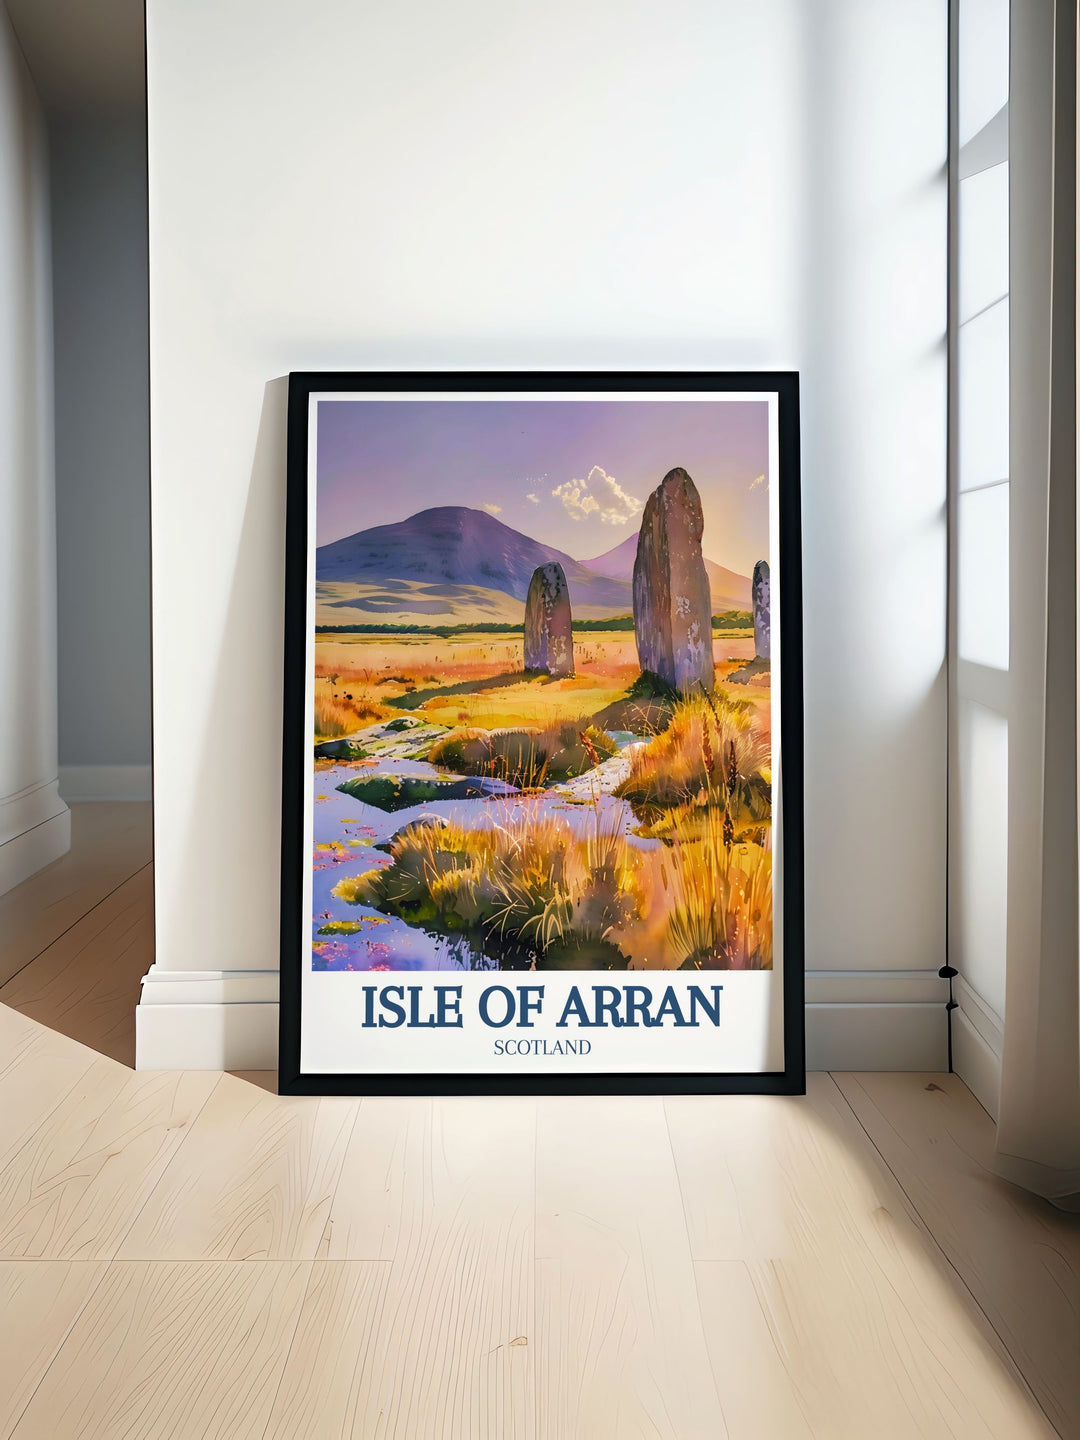 Framed art featuring the captivating beauty of Machrie Moor Standing Stones, including their ancient history and mysterious allure, bringing the essence of the Scottish countryside into your home.